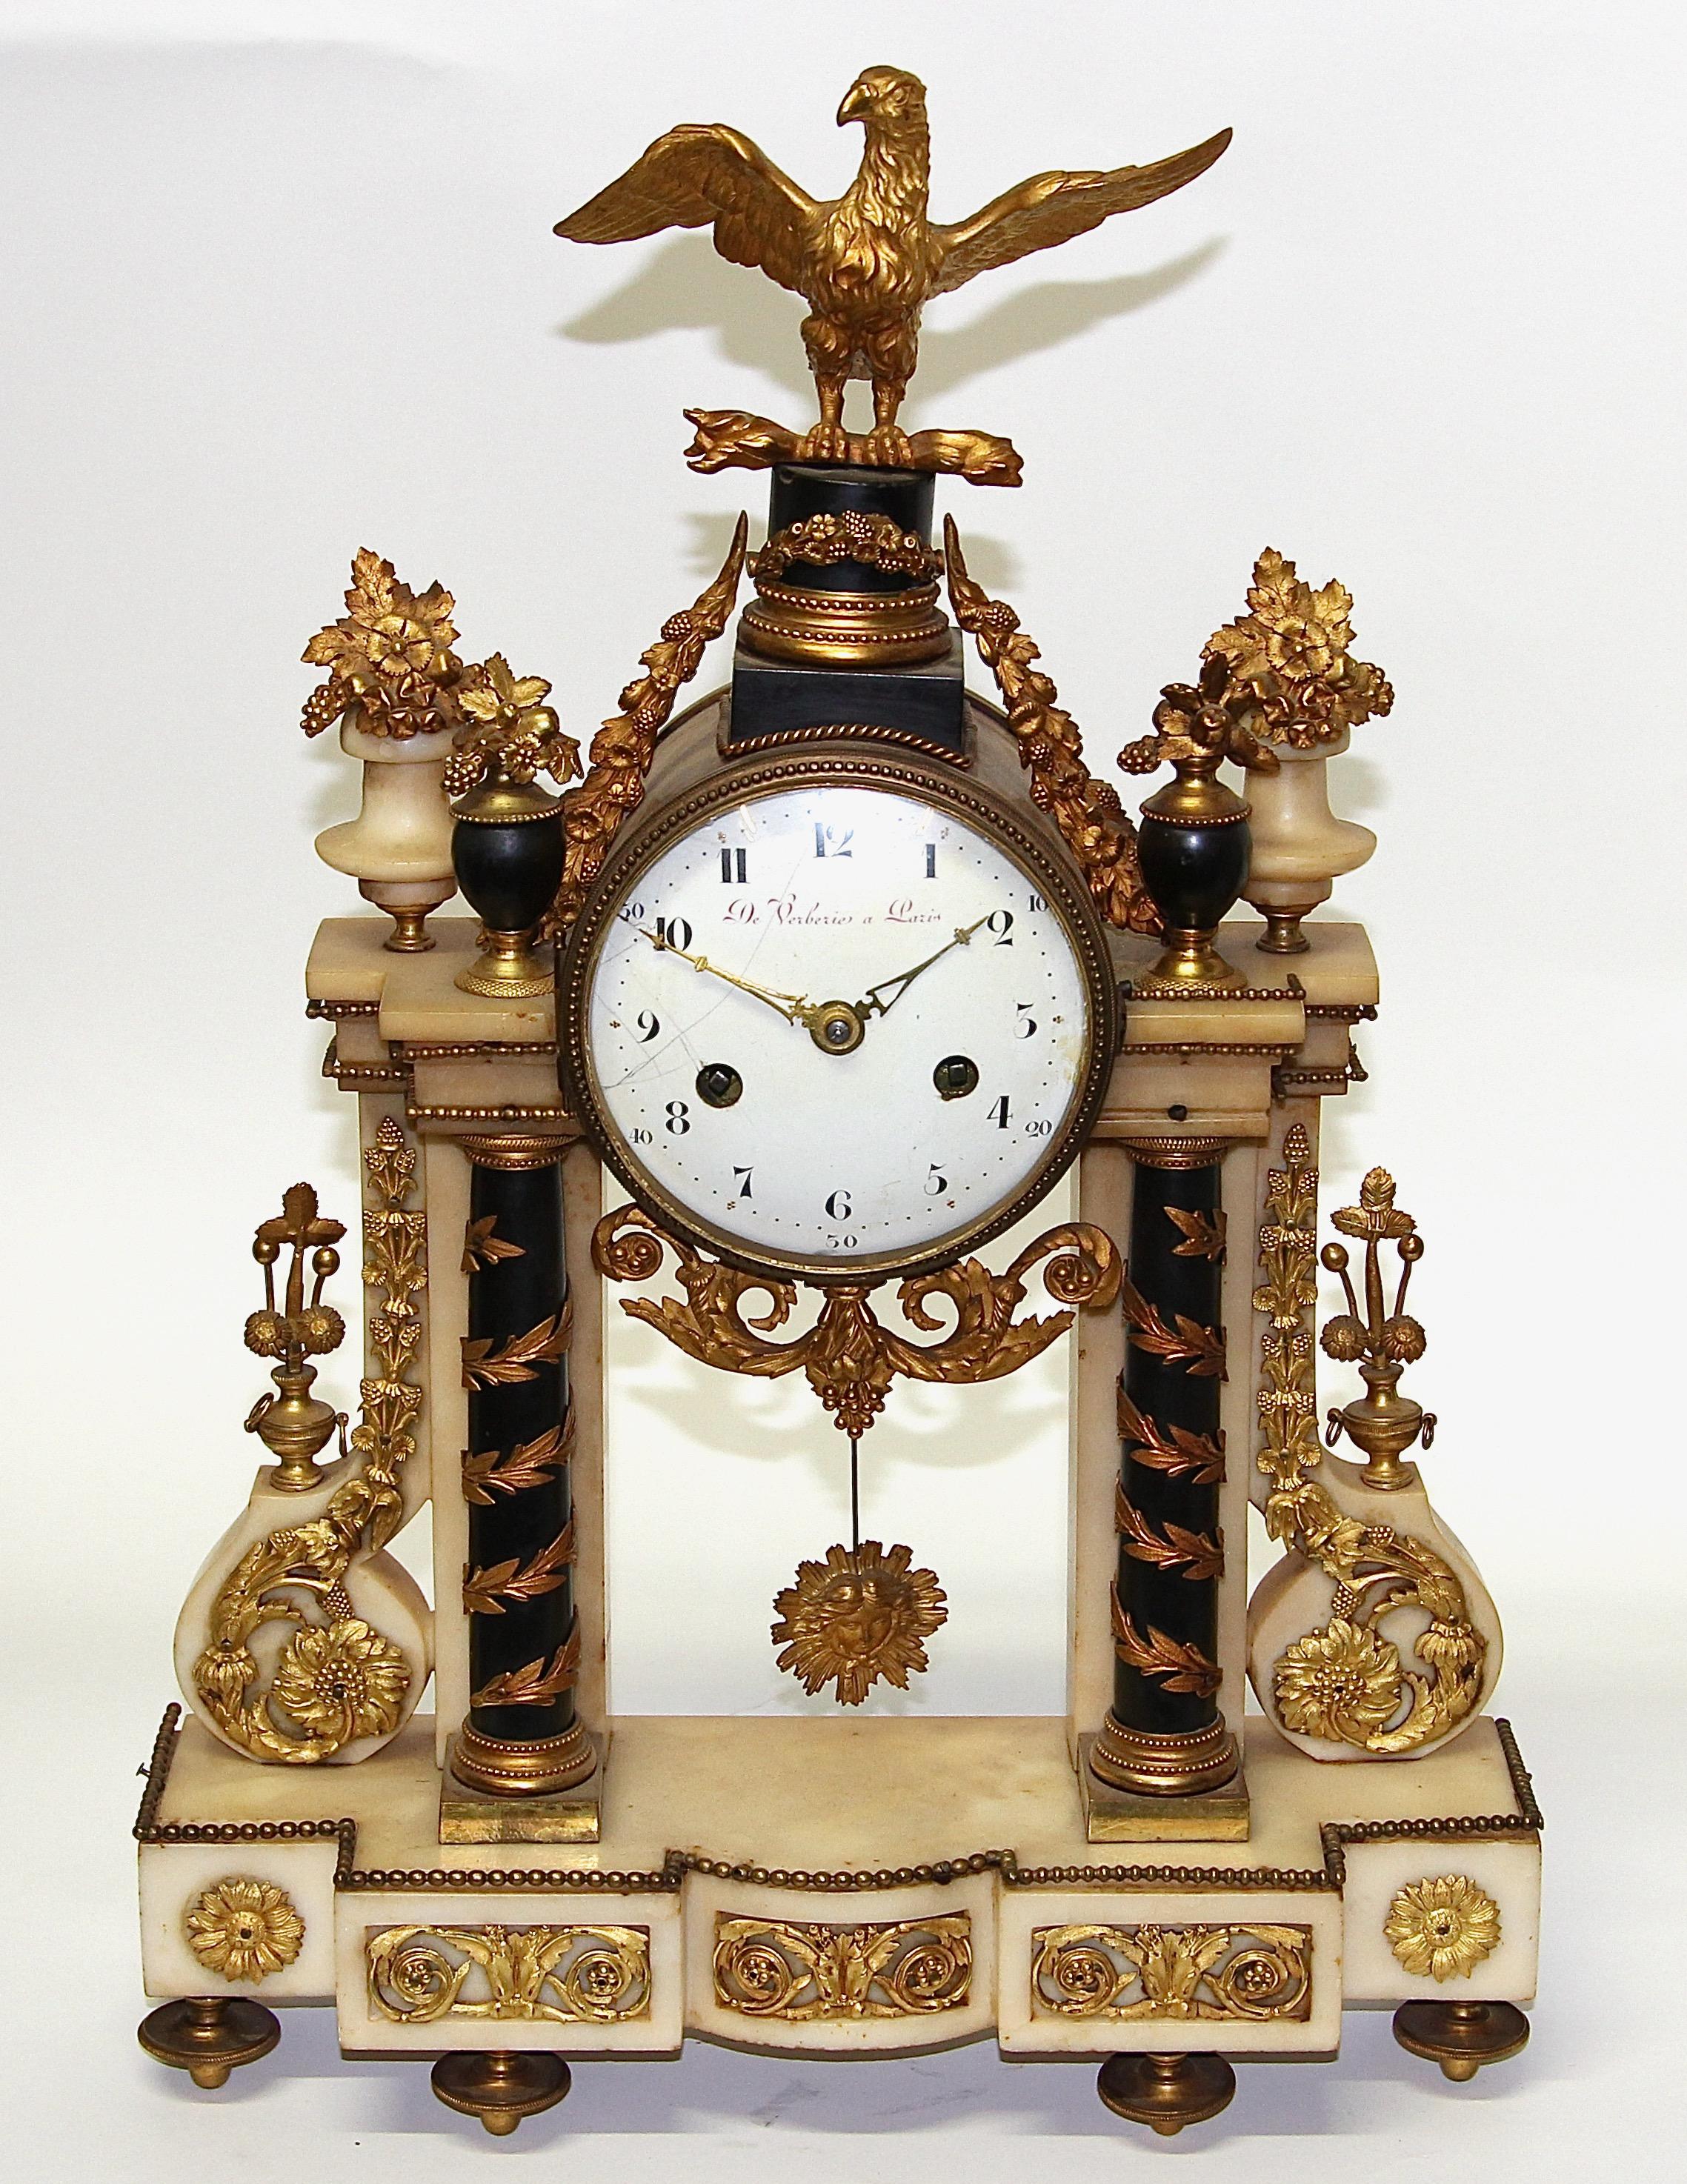 French Empire mantel clock from DeVerberie a Paris.

Fire-gilded.
Age-related condition.